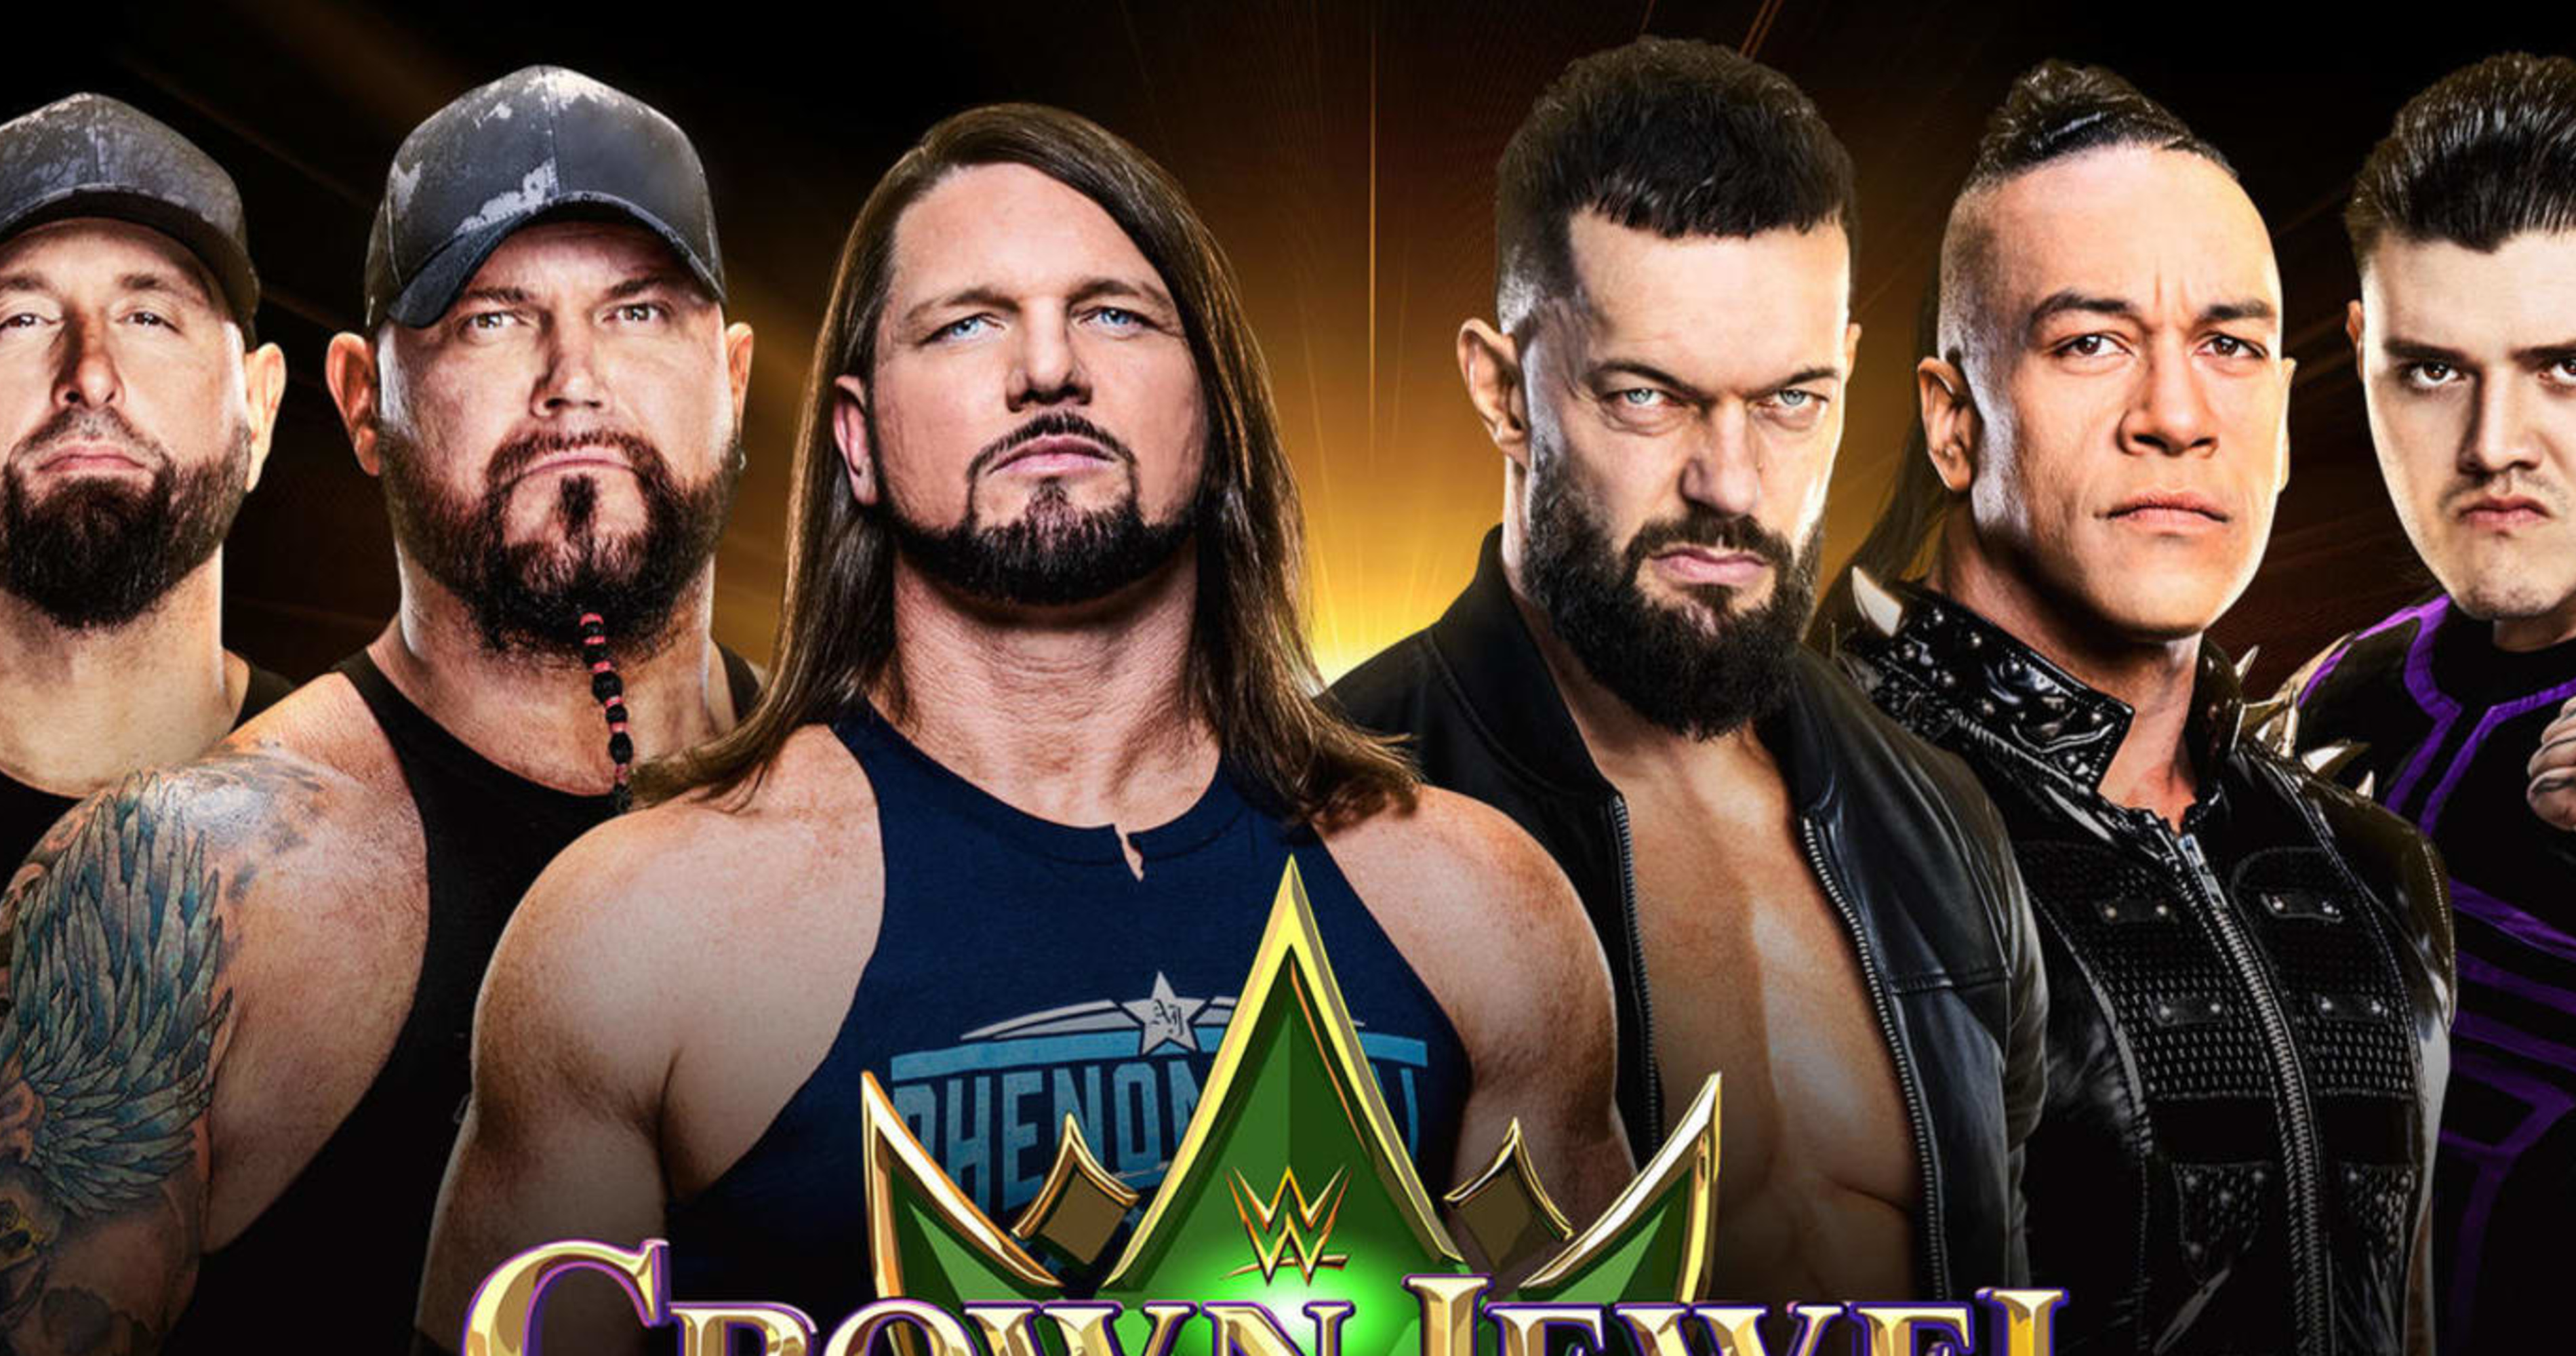 The Judgment Day Defeat The O.C. at WWE Crown Jewel 2022 News, Scores